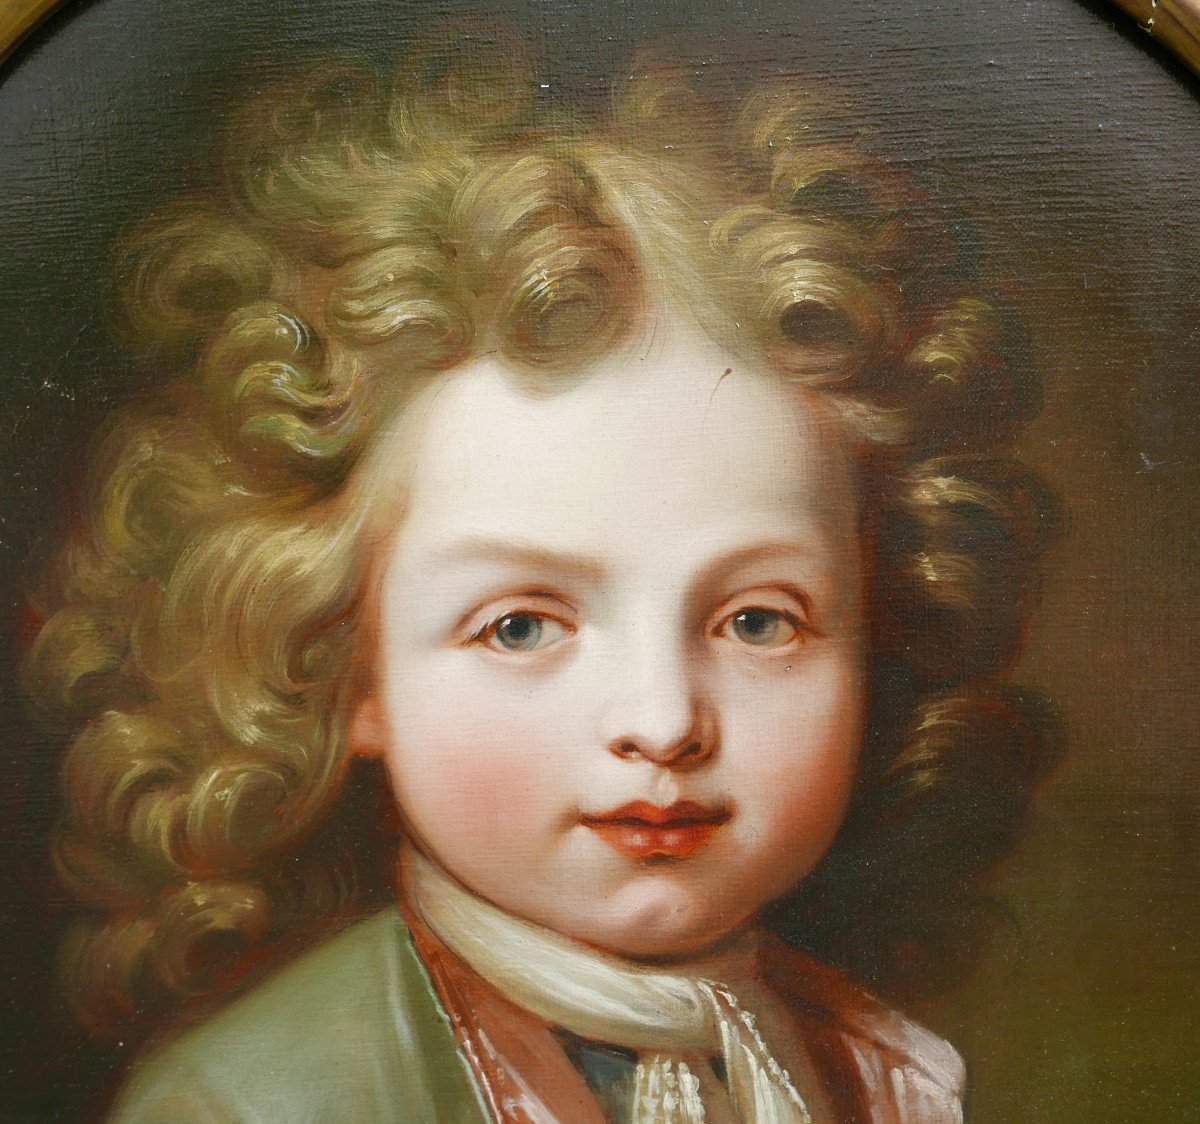 Portrait Of A Young Boy After Hyacinthe Rigaud Oil/canvas From The 19th Century-photo-3